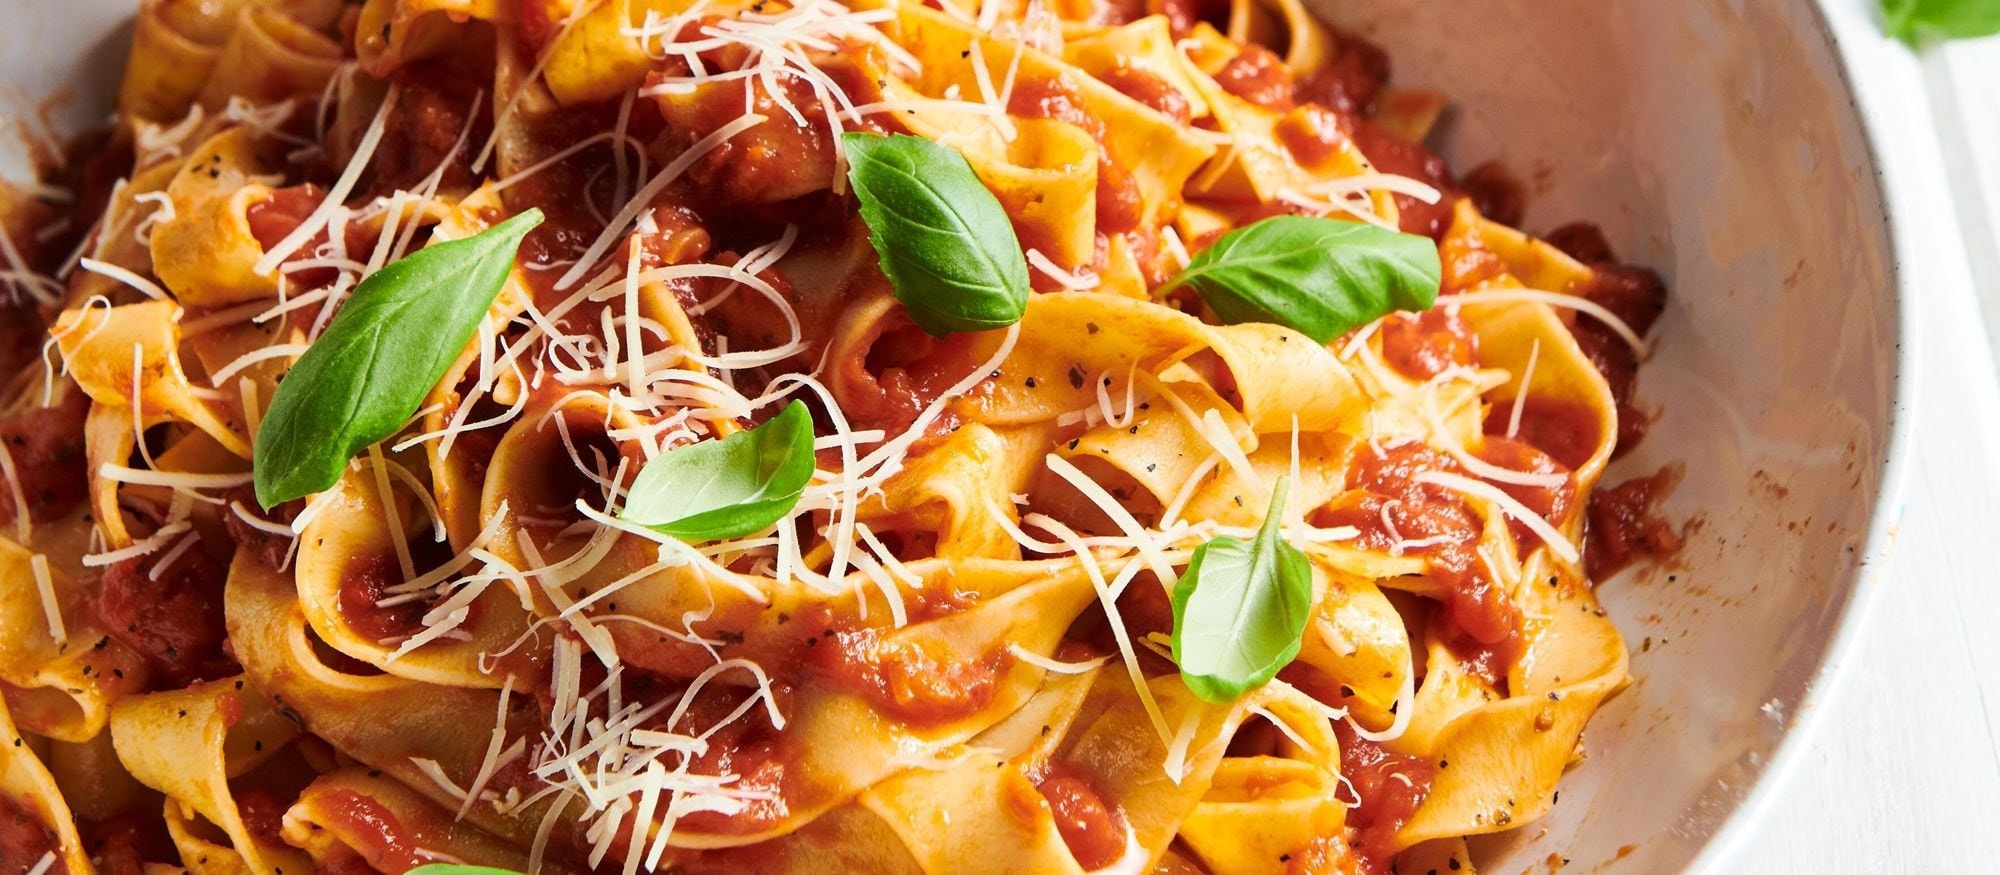 Our Guide to Making Pappardelle Pasta